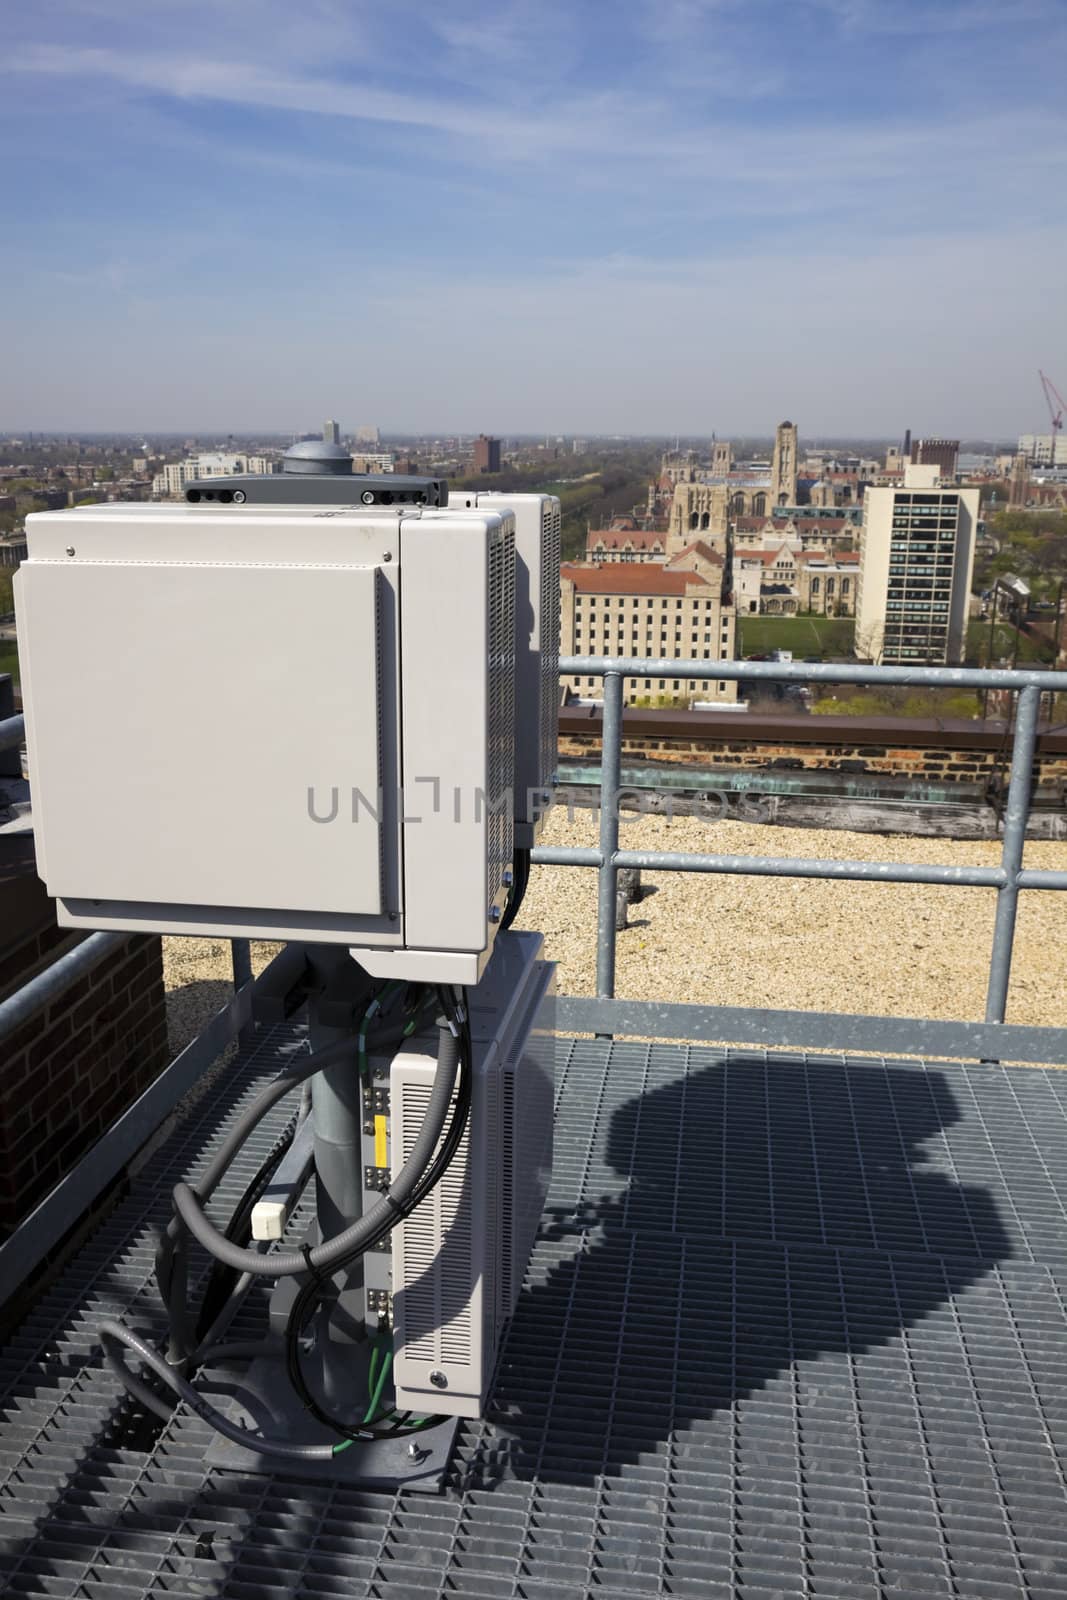 Cellular equipment installed on the roof.